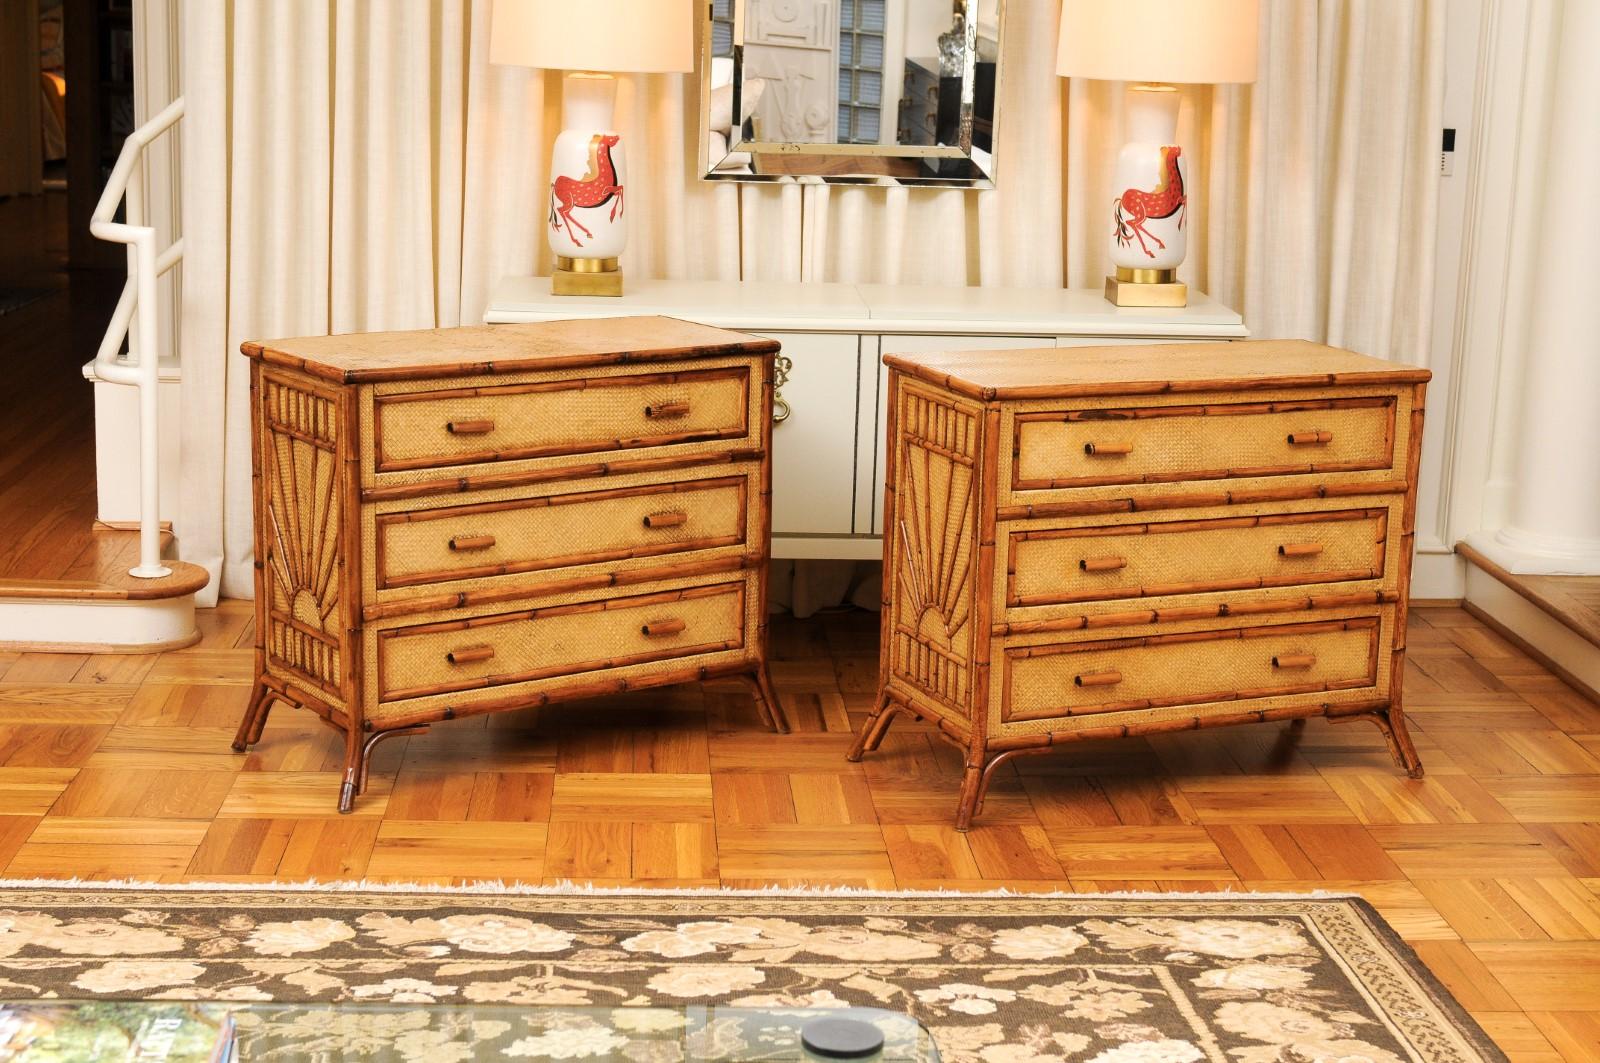 These magnificent chests are shipped as professionally photographed and described in the listing narrative: Meticulously professionally restored and completely installation ready. 

An incredible restored pair of commodes, circa 1950. Expertly